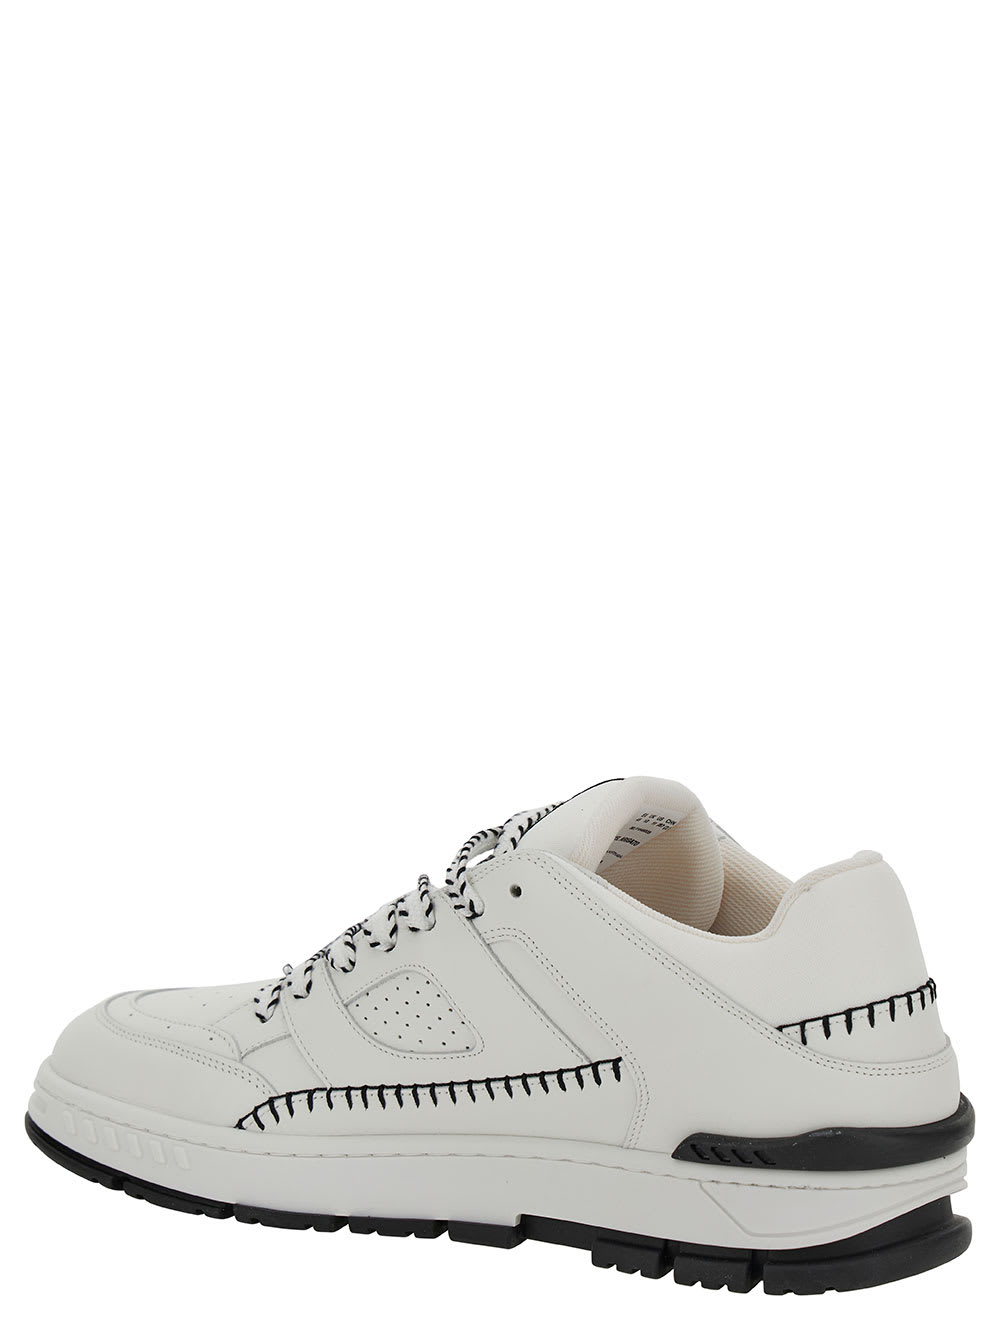 Shop Axel Arigato Area Lo Sneaker Stitch White Low Top Sneakers With Contrasting Stitch Detail In Leather Man